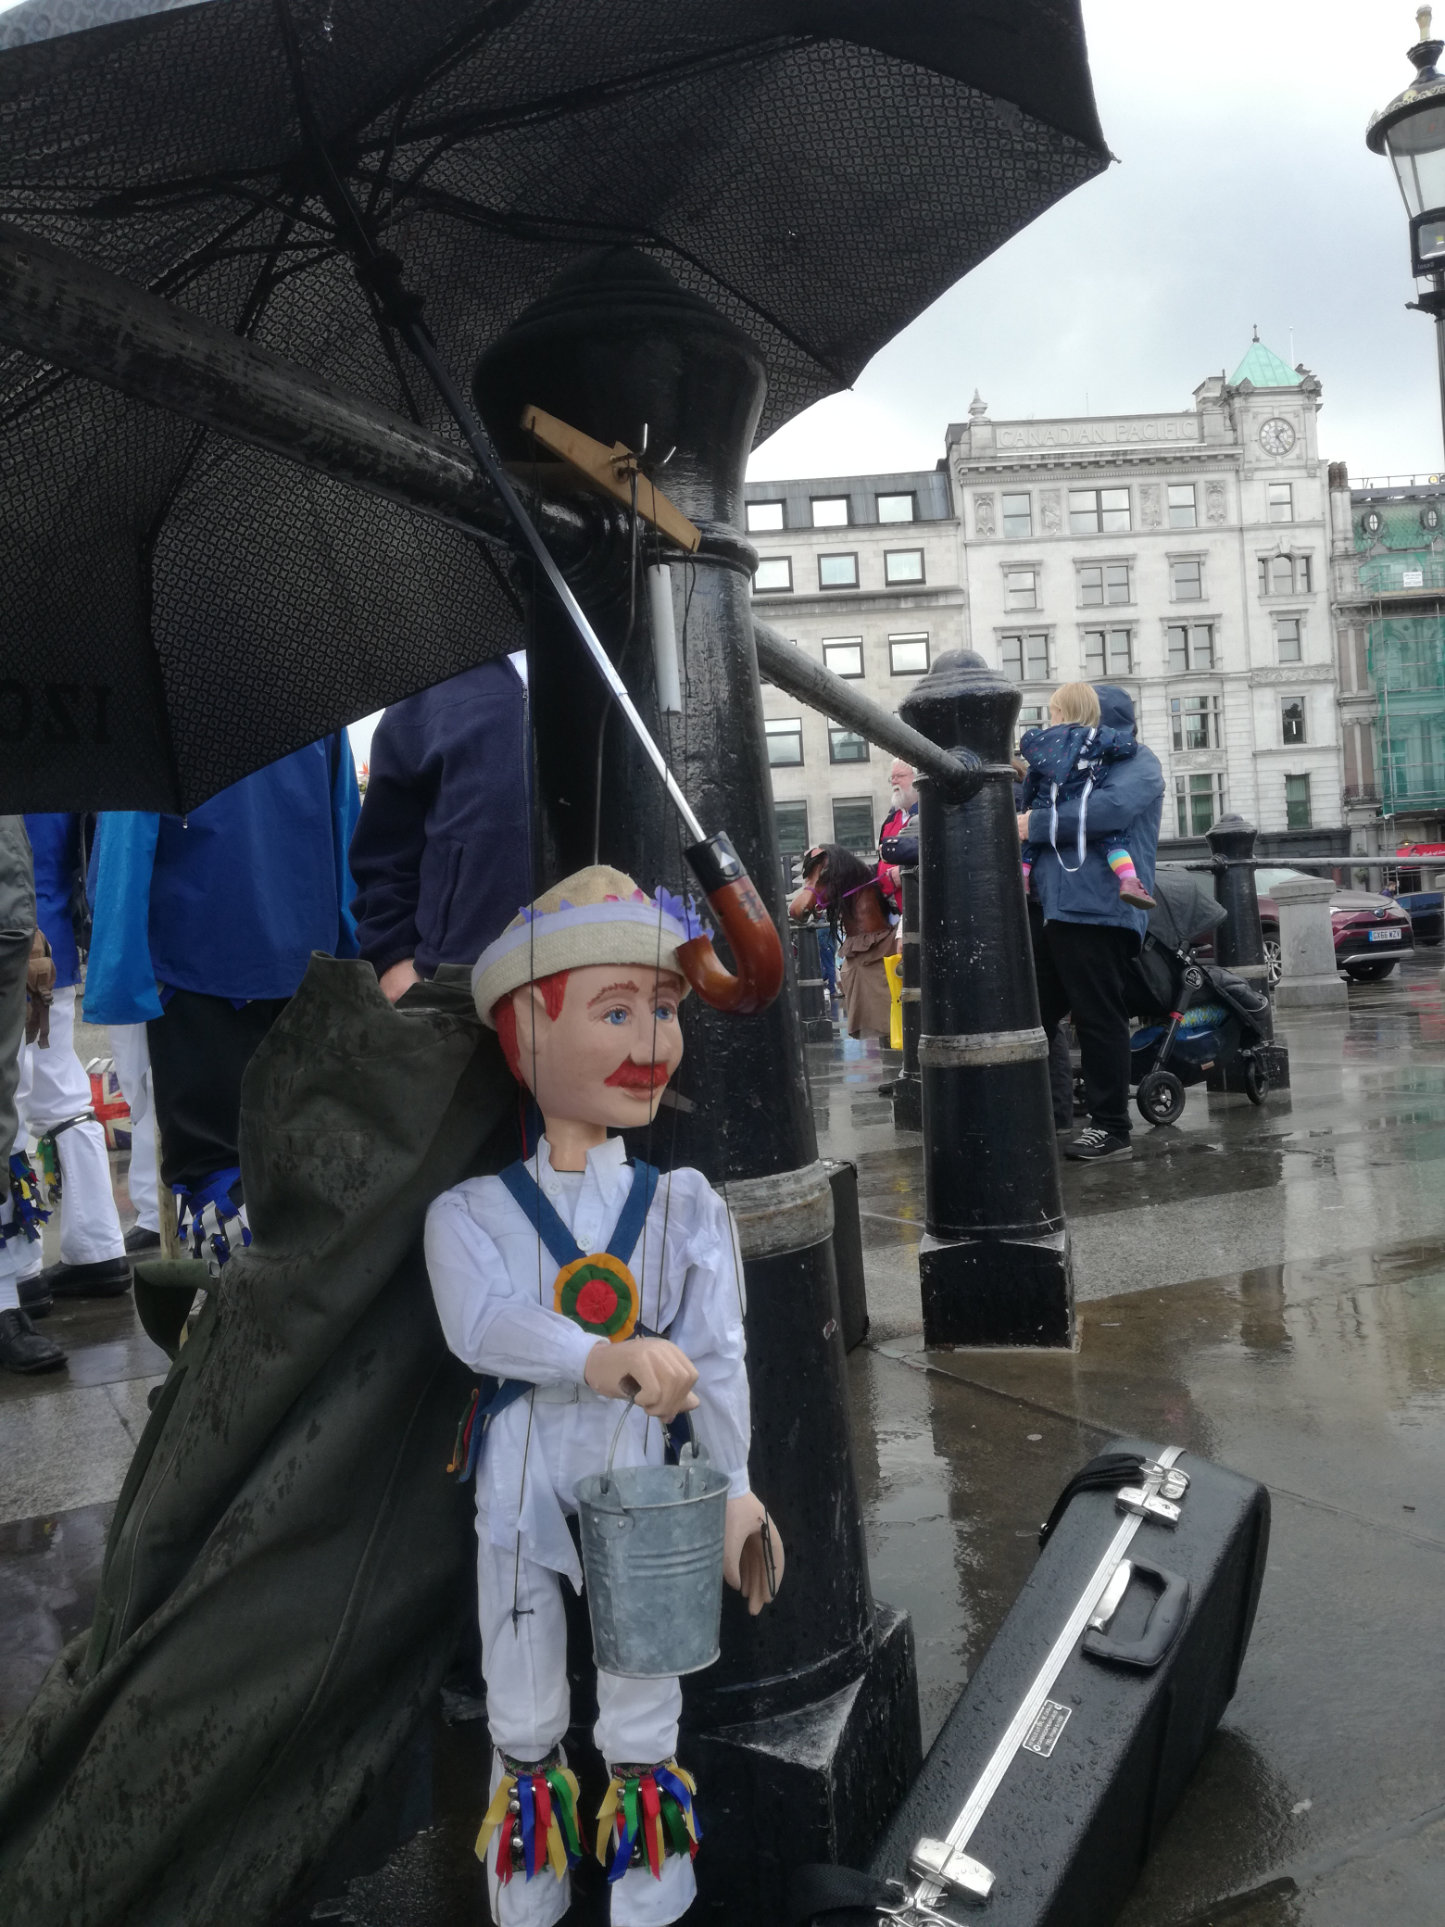 Little Pete sheltering from the rain on the Westminster Day of Dance 2019